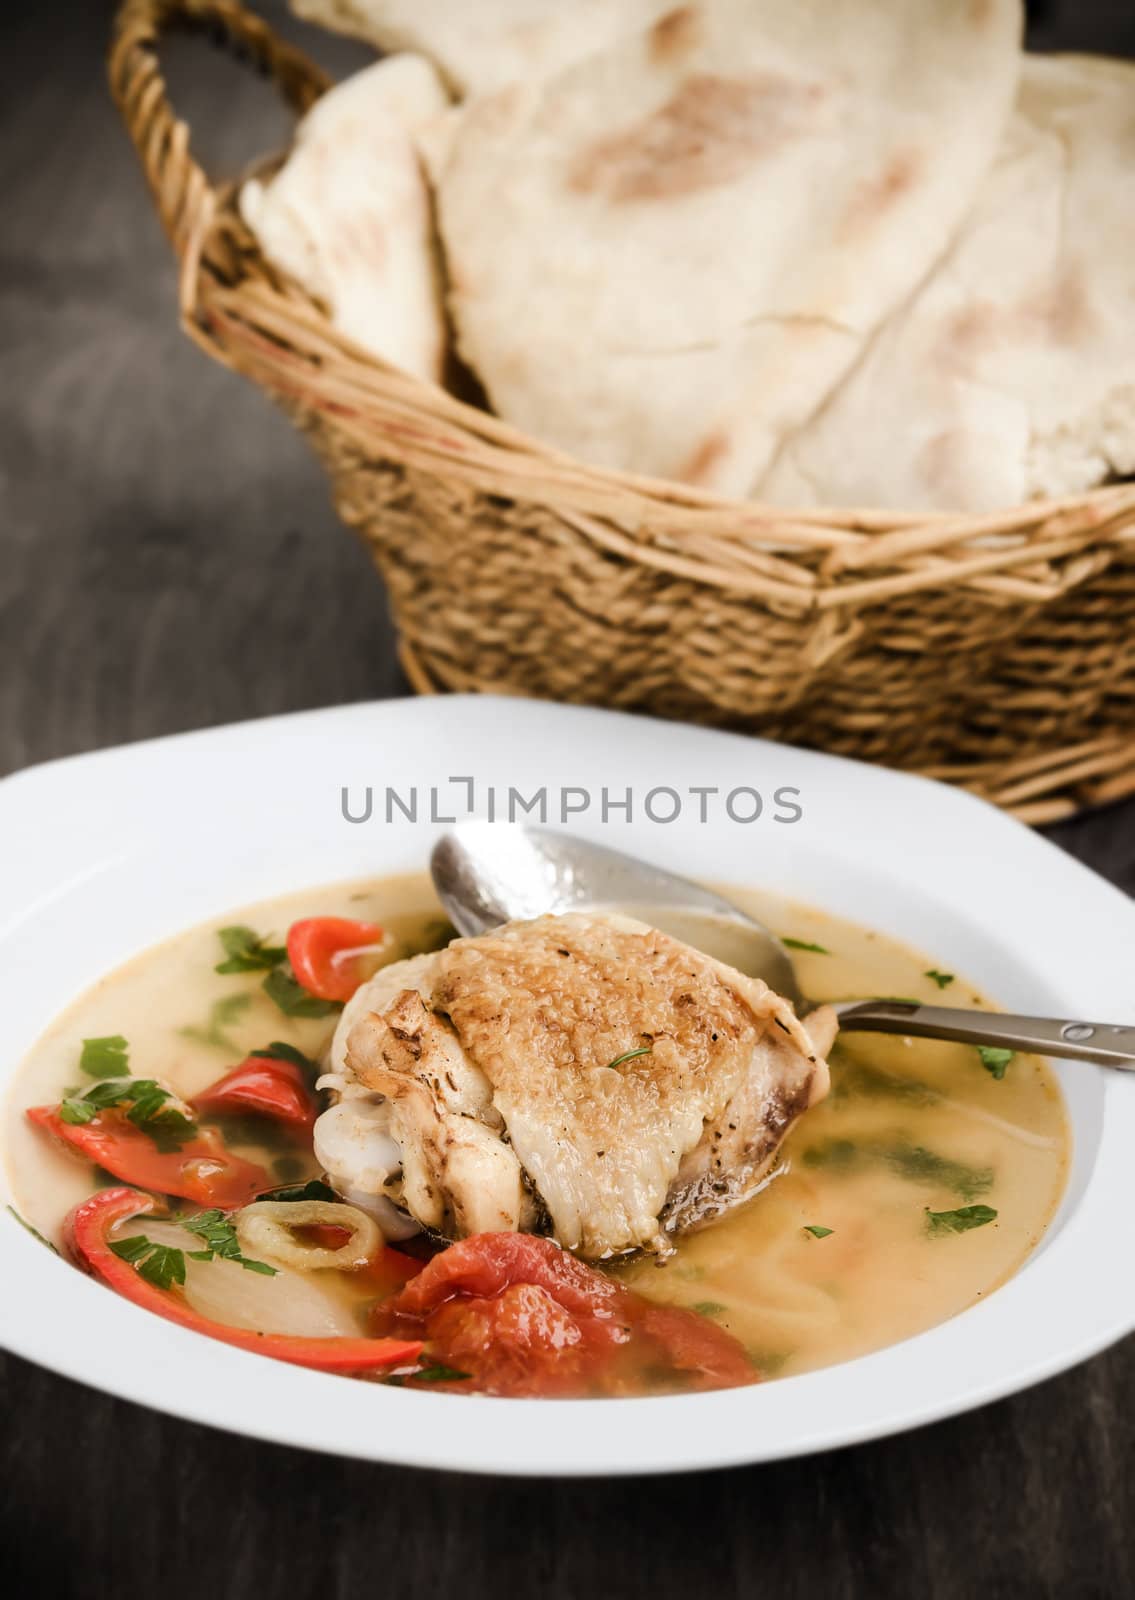 Chicken sour soup by silent47